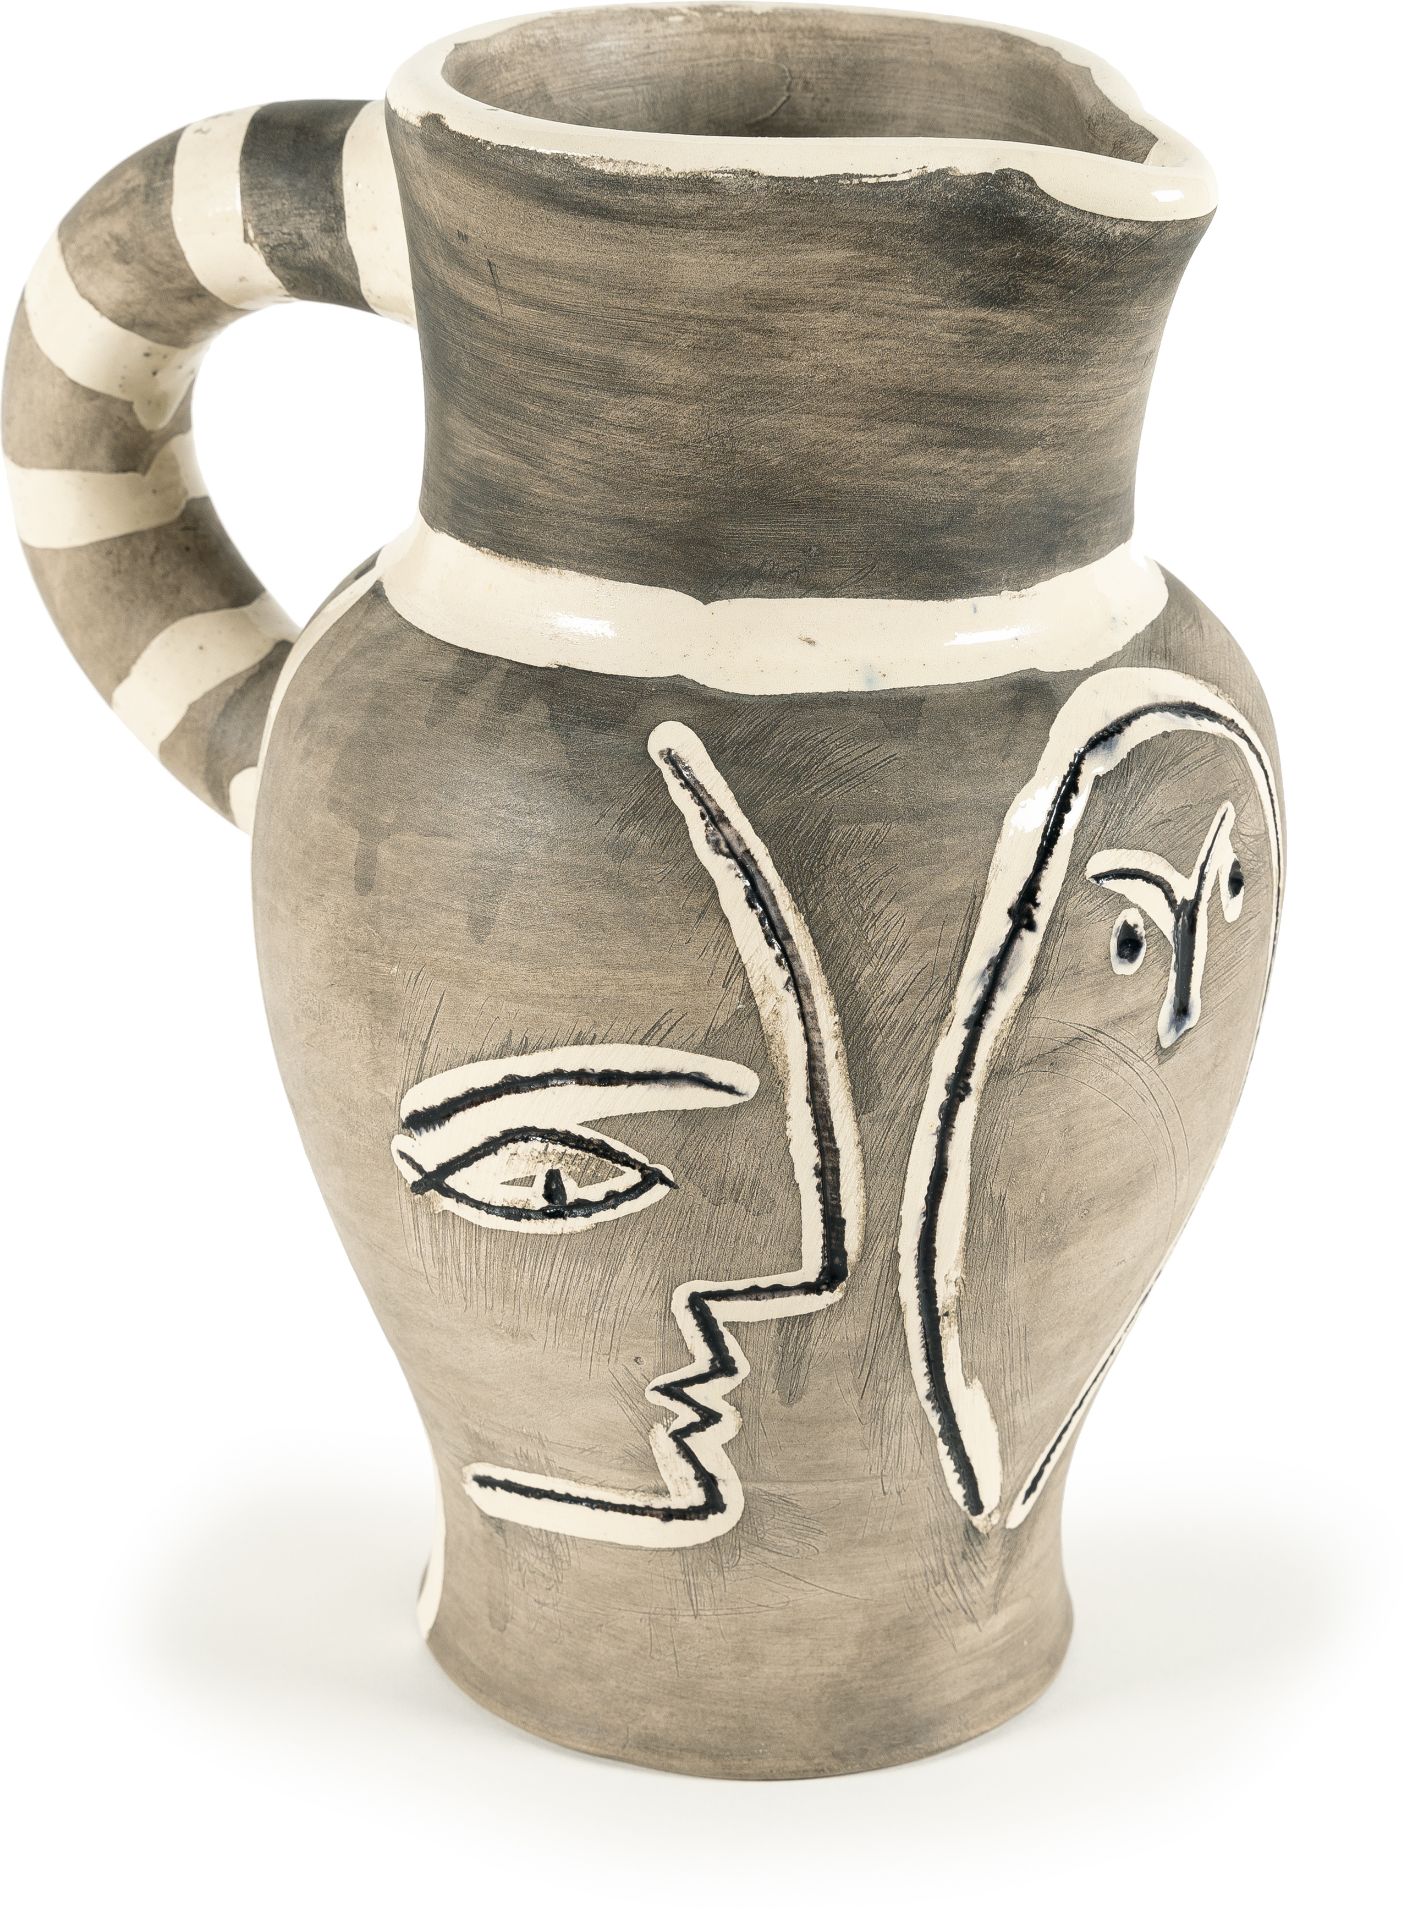 Pablo Picasso, Pichet gravé gris.Ceramic, white mass with engobe and knife incisions, partially